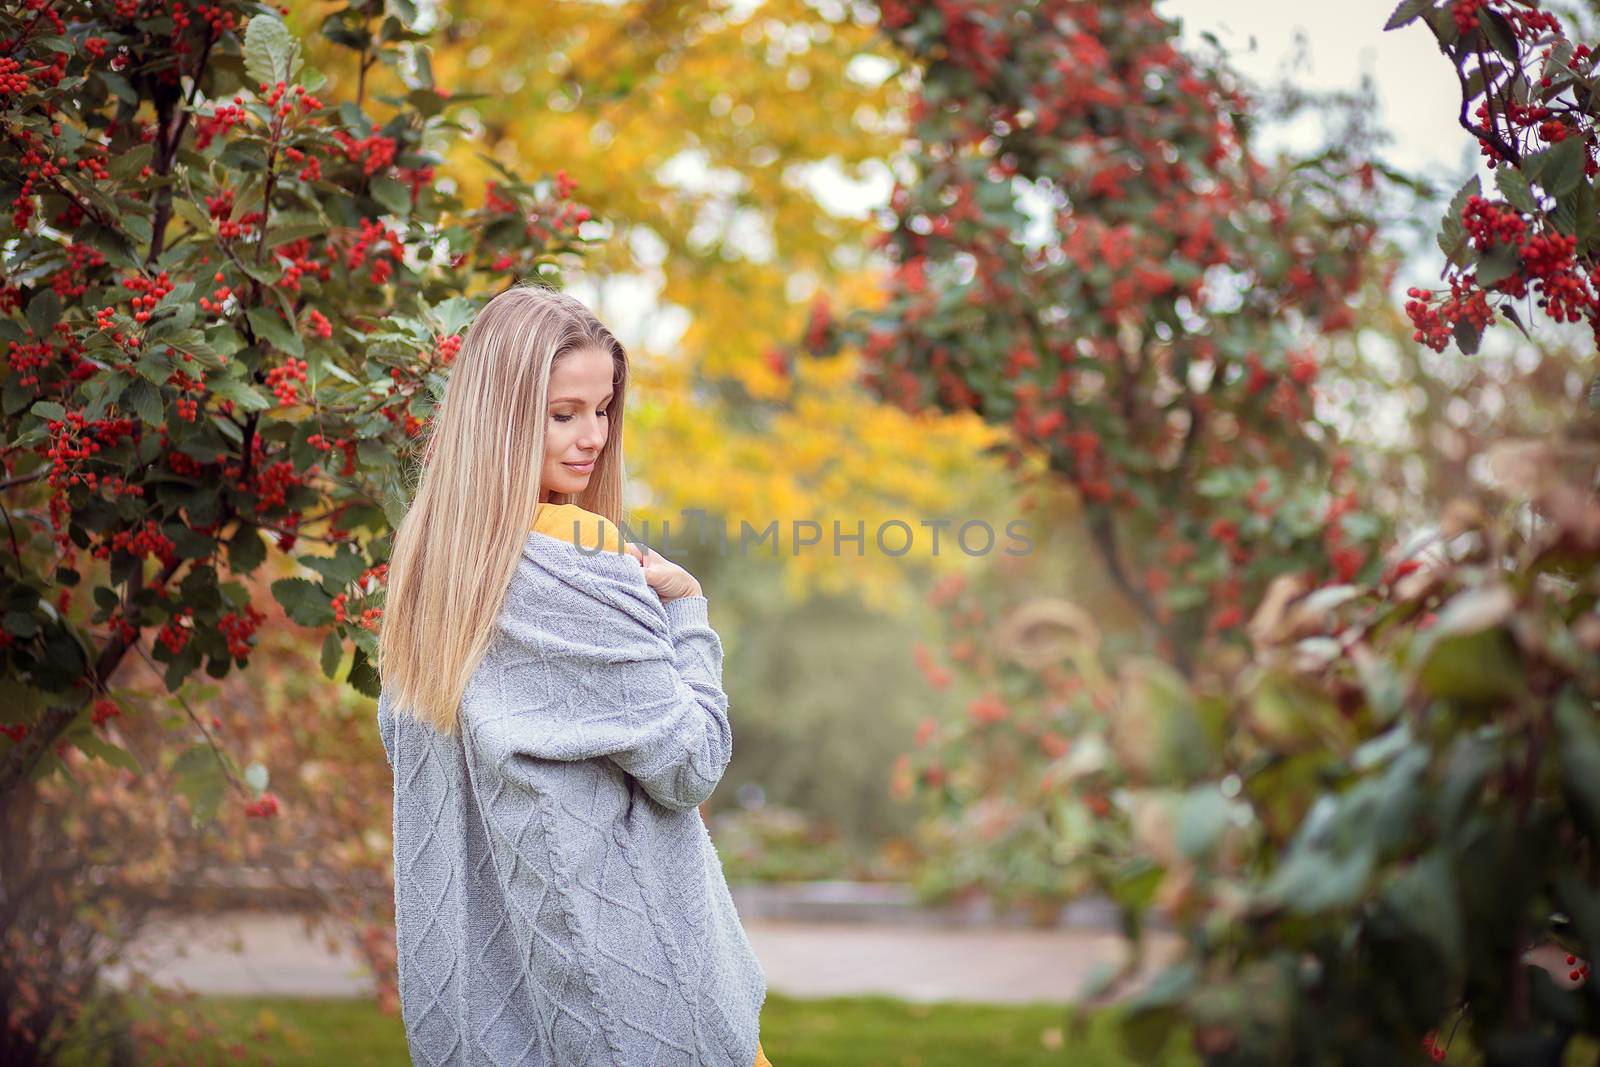 A girl in a gray cardigan and a yellow dress among the autumn trees with red berries. Autumn theme by borisenkoket